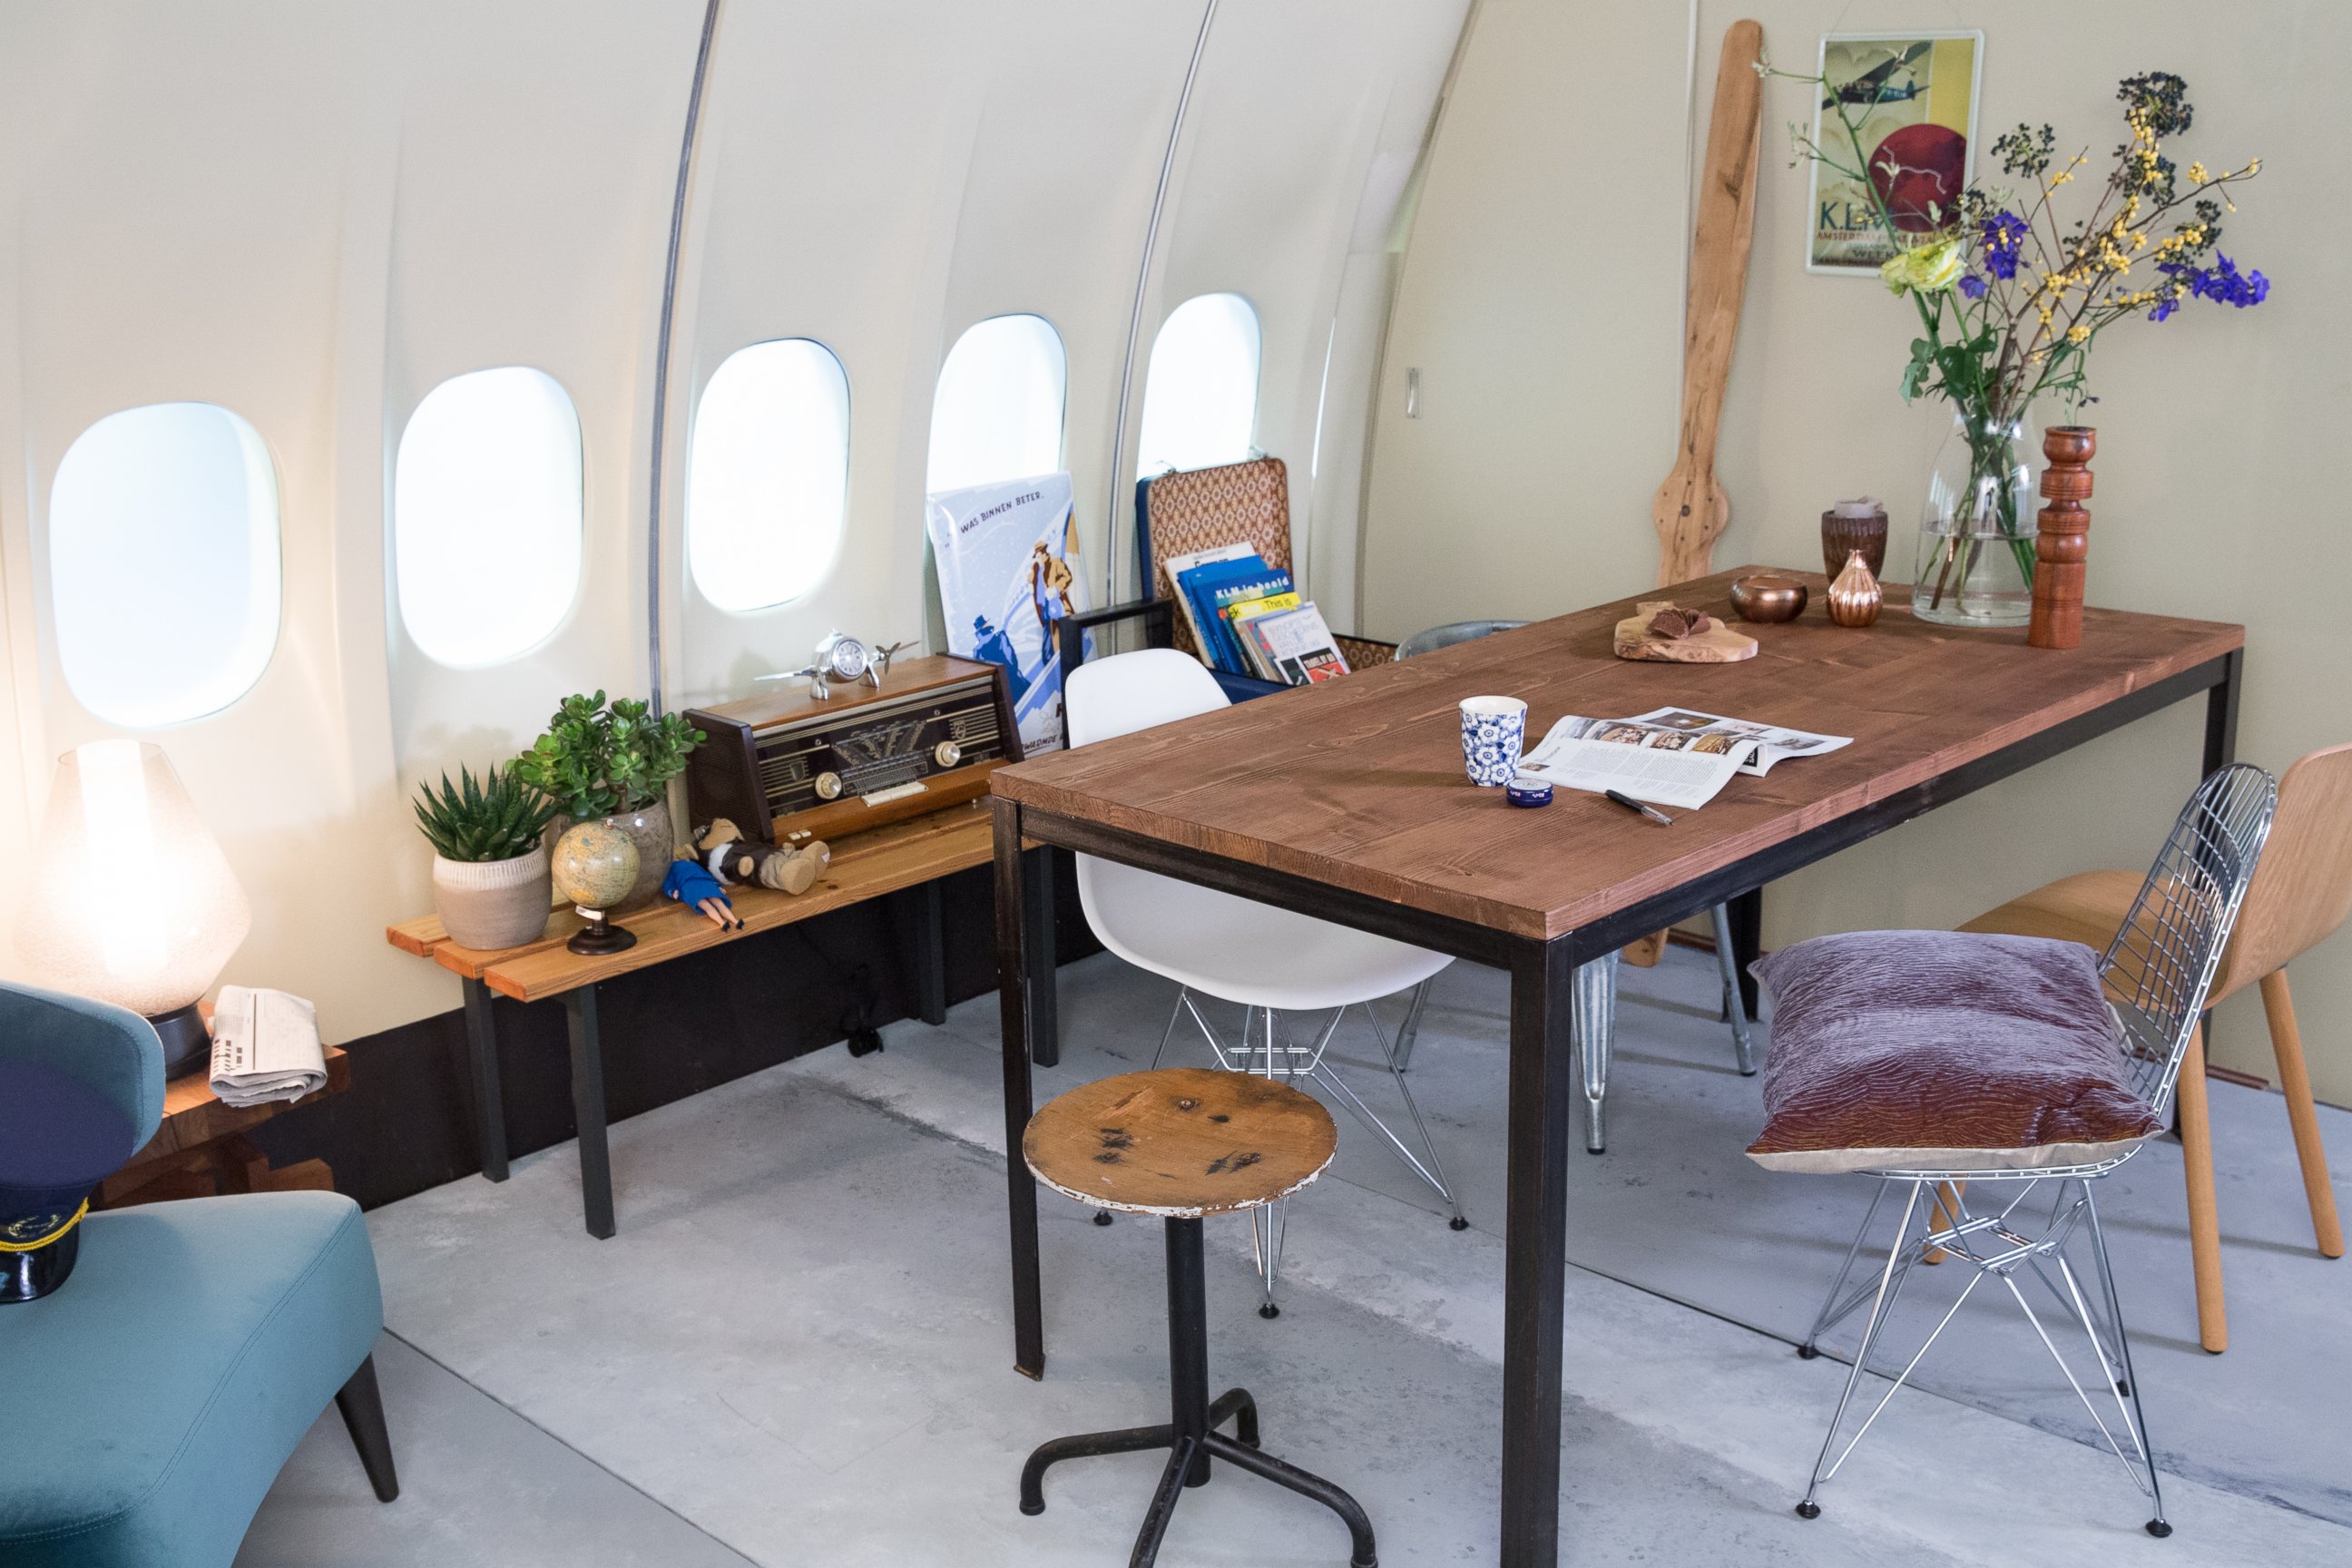 PHOTO: Airbnb has teamed up with KLM Royal Dutch Airlines to offer a night in a refurbished plane. 